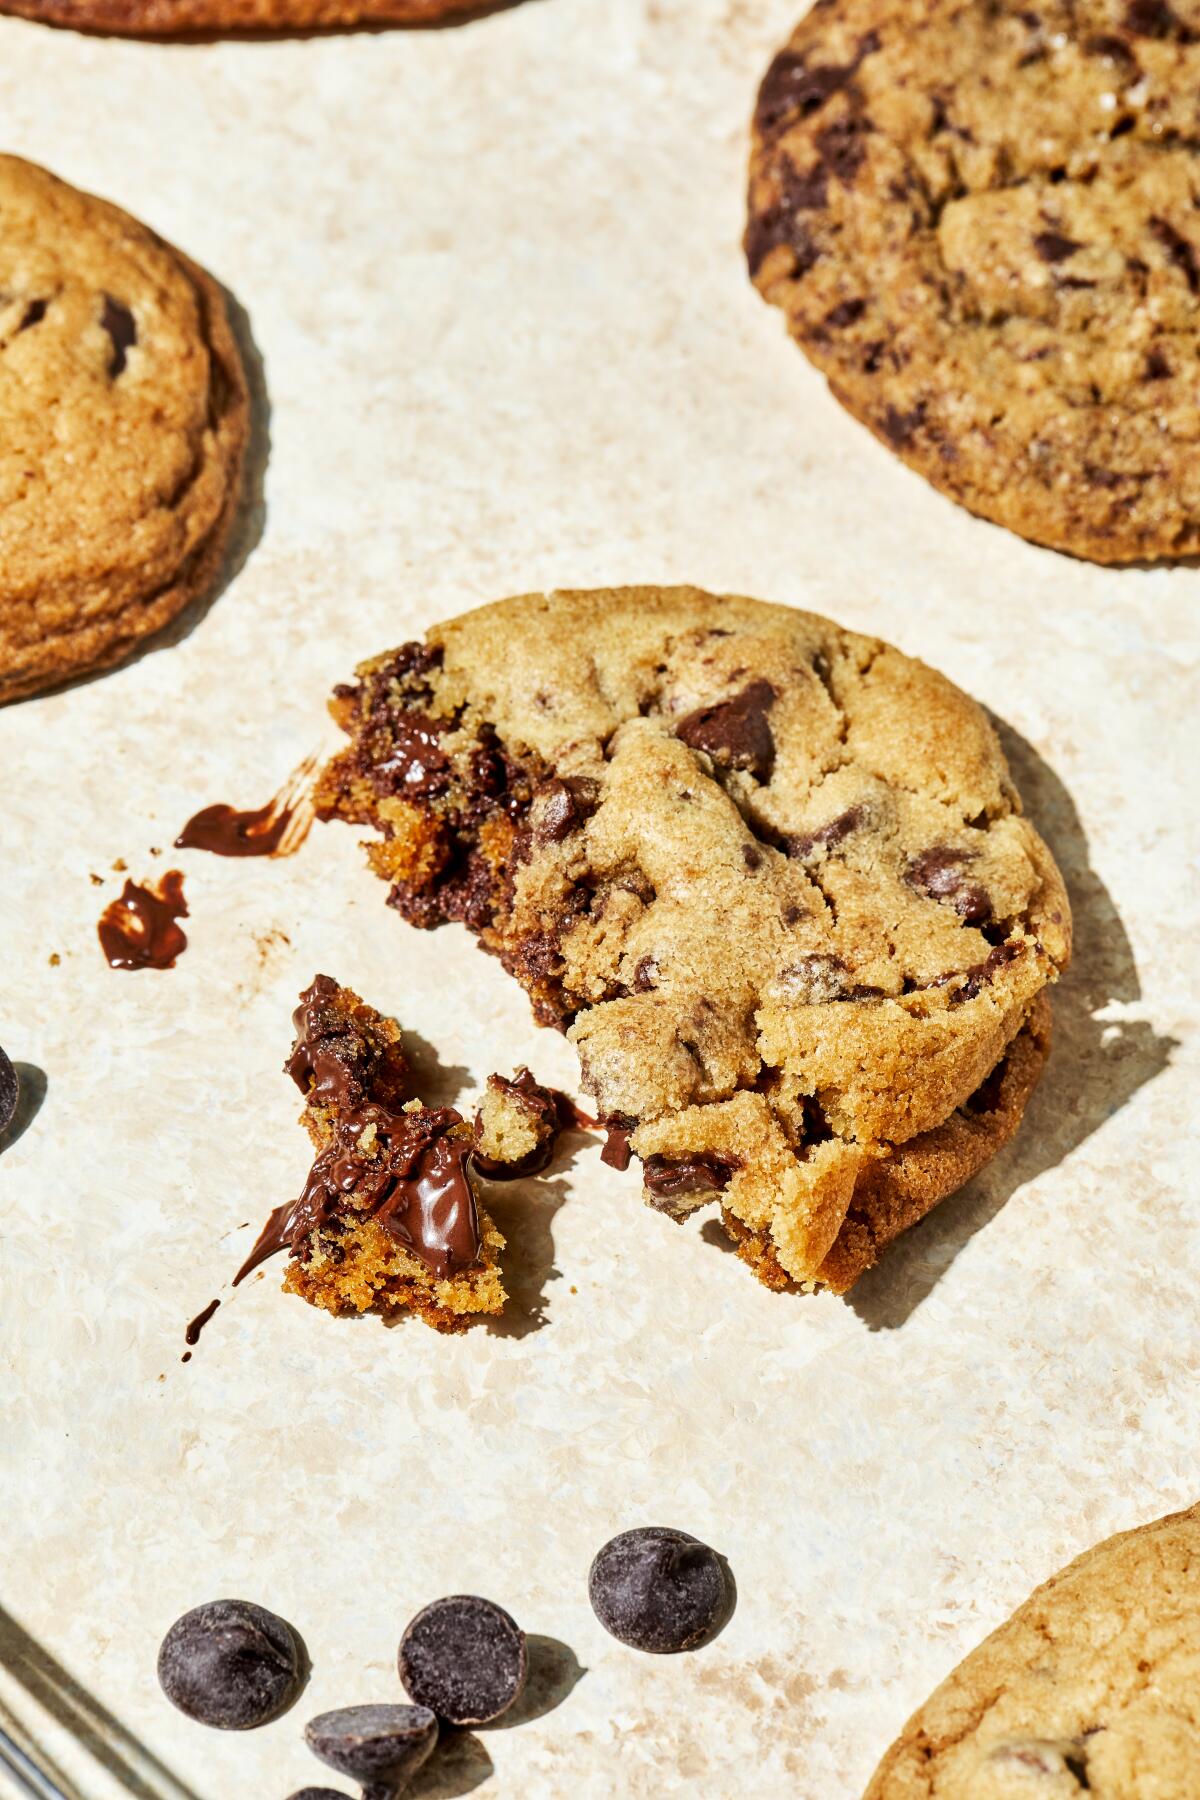 Marcy Goldman's Commercial-Style Chocolate Chip Cookie.